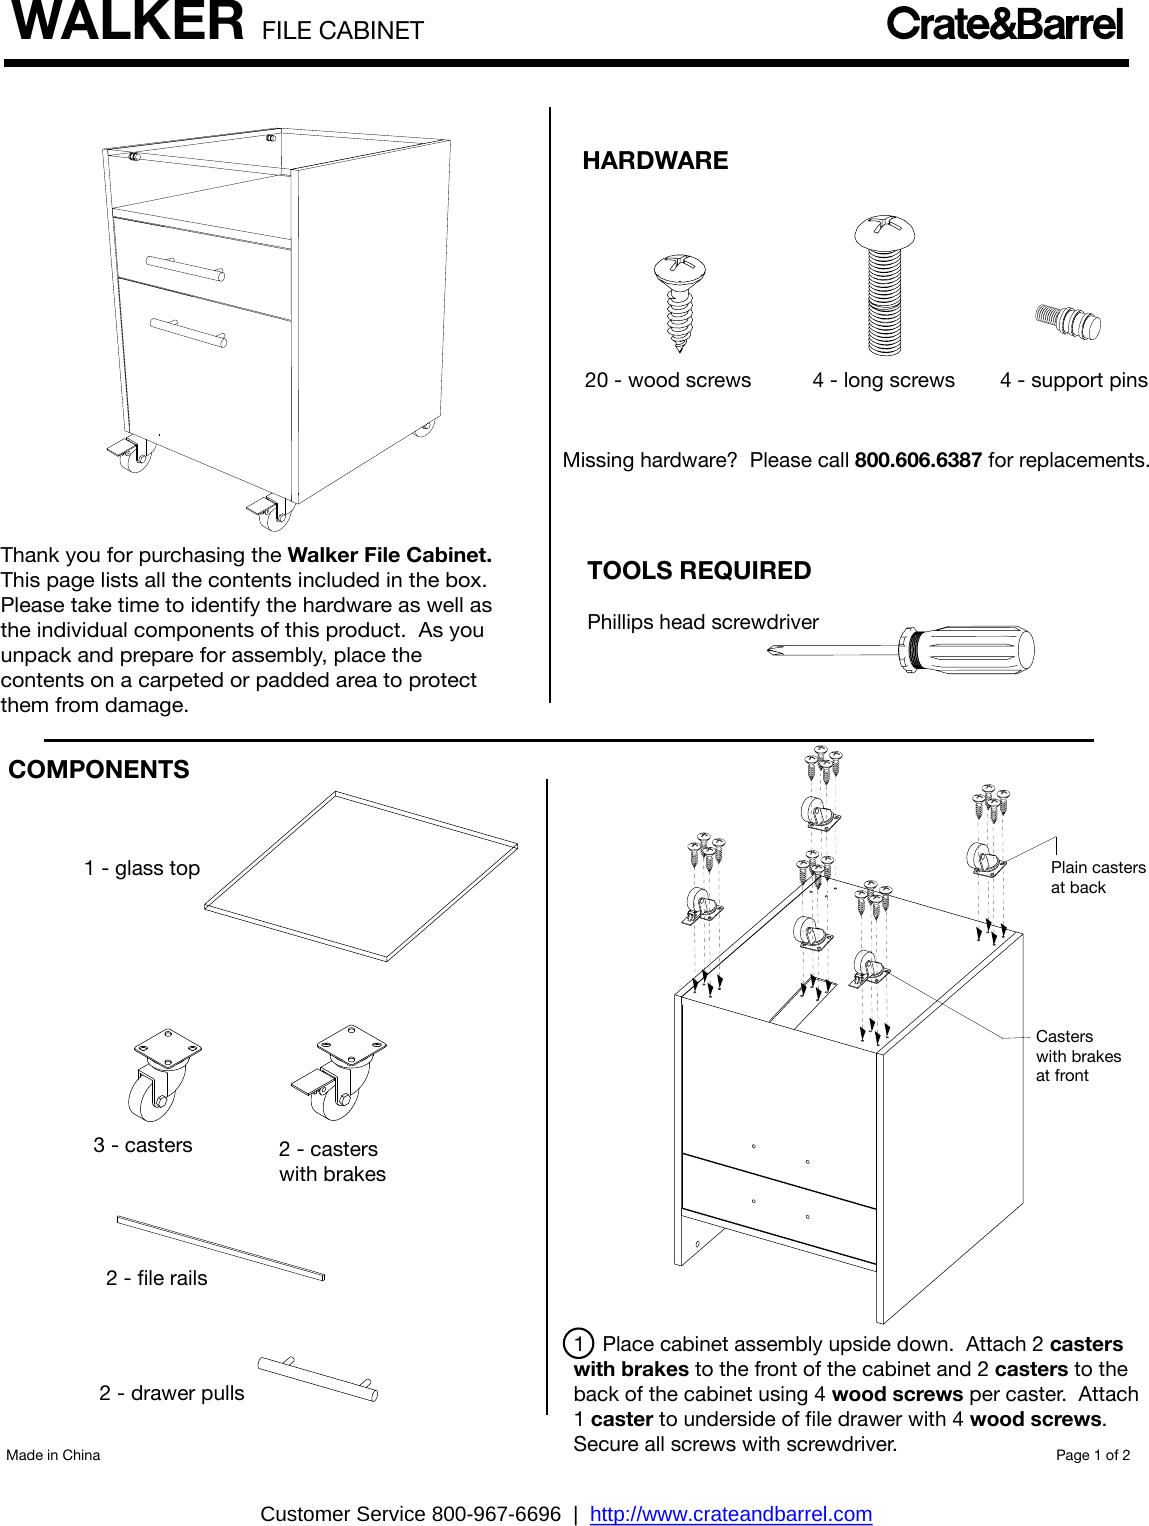 Crate Barrel 1045 Walker File Cabinet Assembly Instructions From And